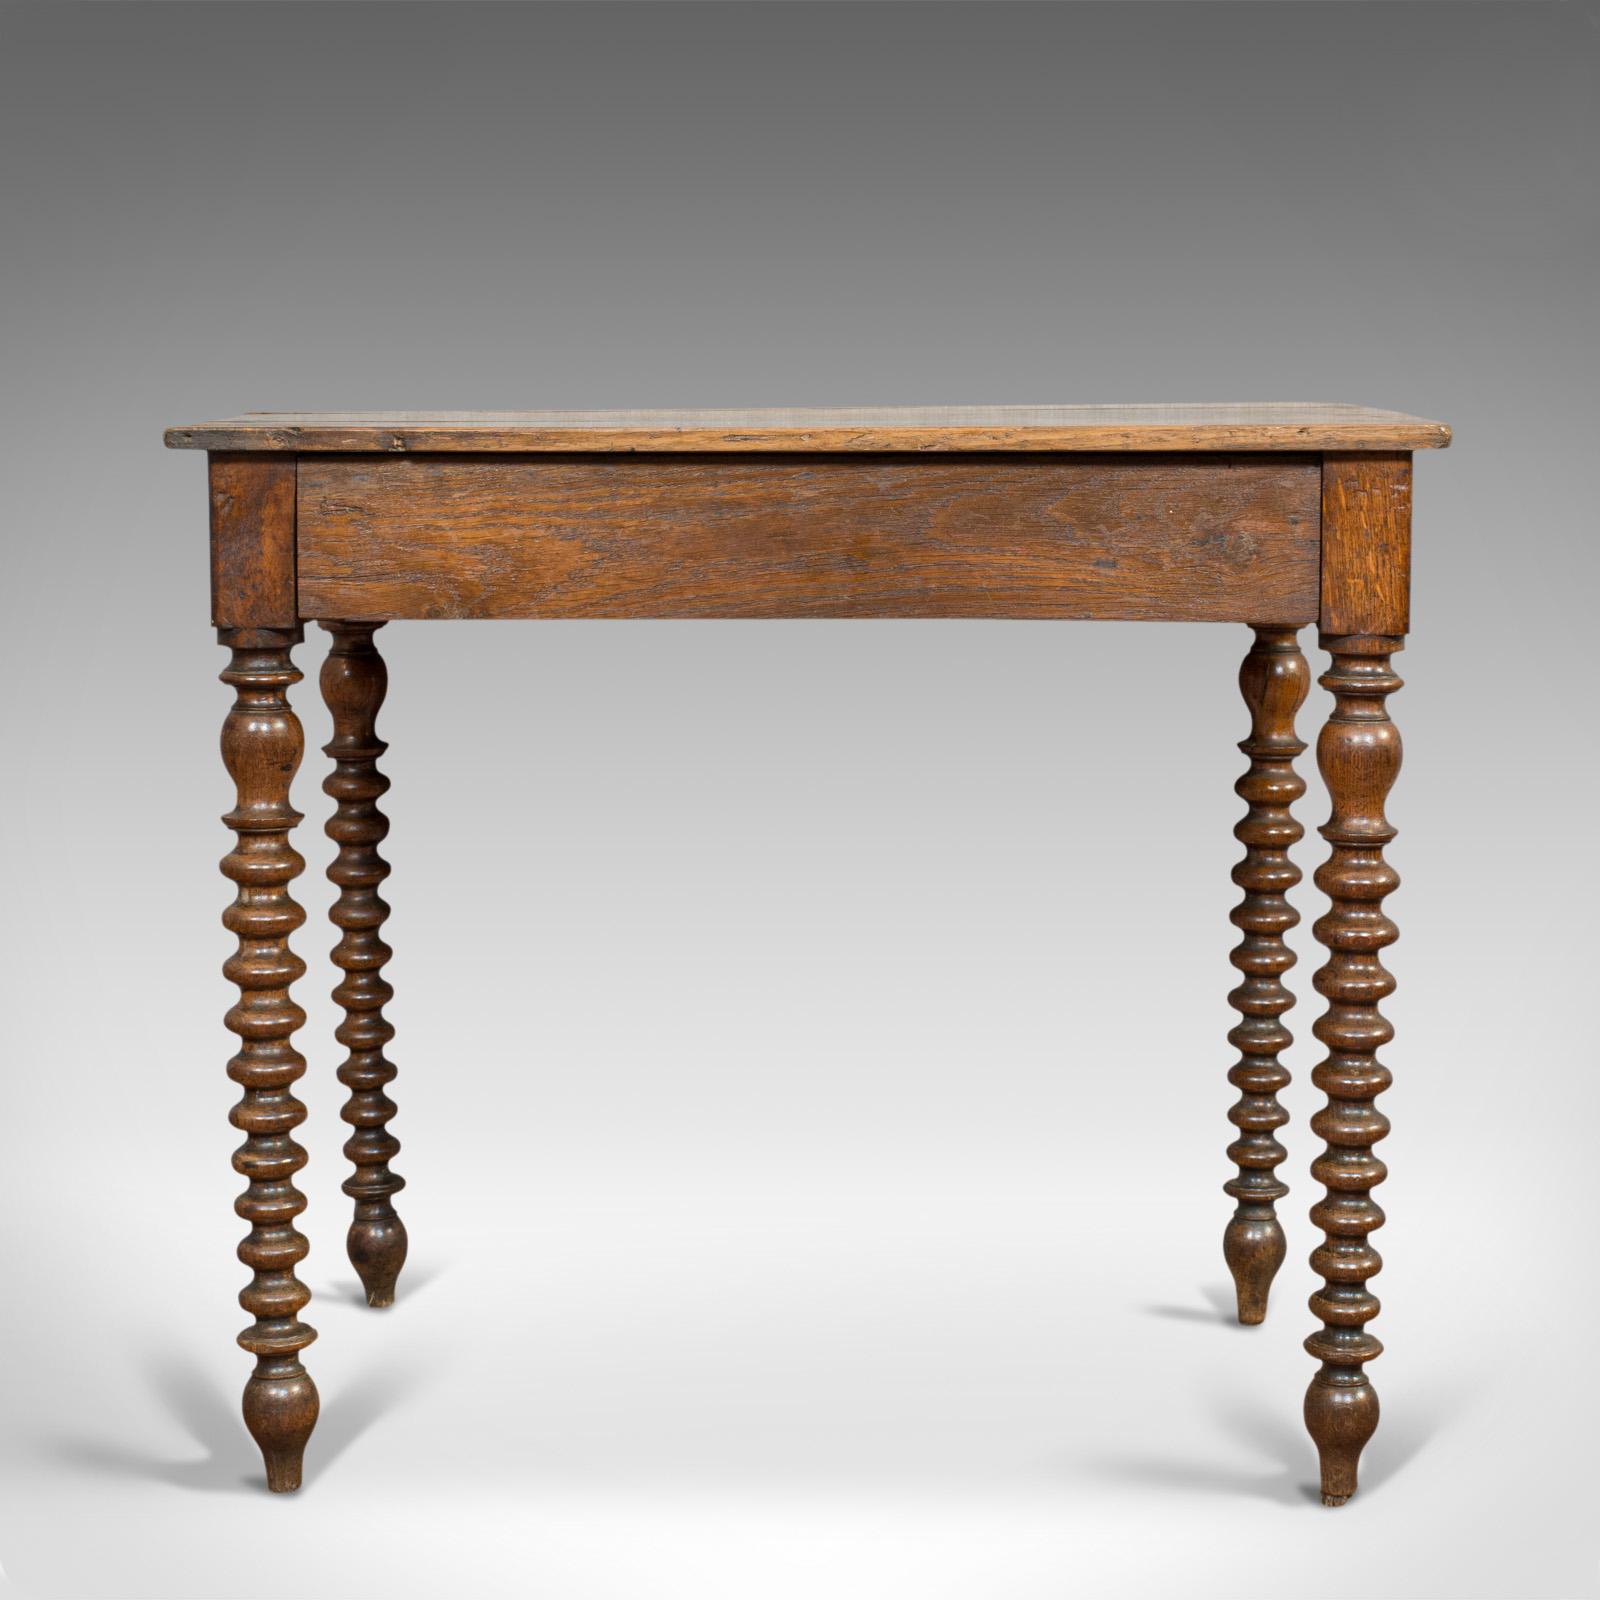 This is an antique side table. An English, oak desk or occasional table from the Georgian period, circa 1780.

Wonderful Georgian period table 
Displays a desirable aged patina - hugely characterful top, 
Smooth from years of waxing and showing